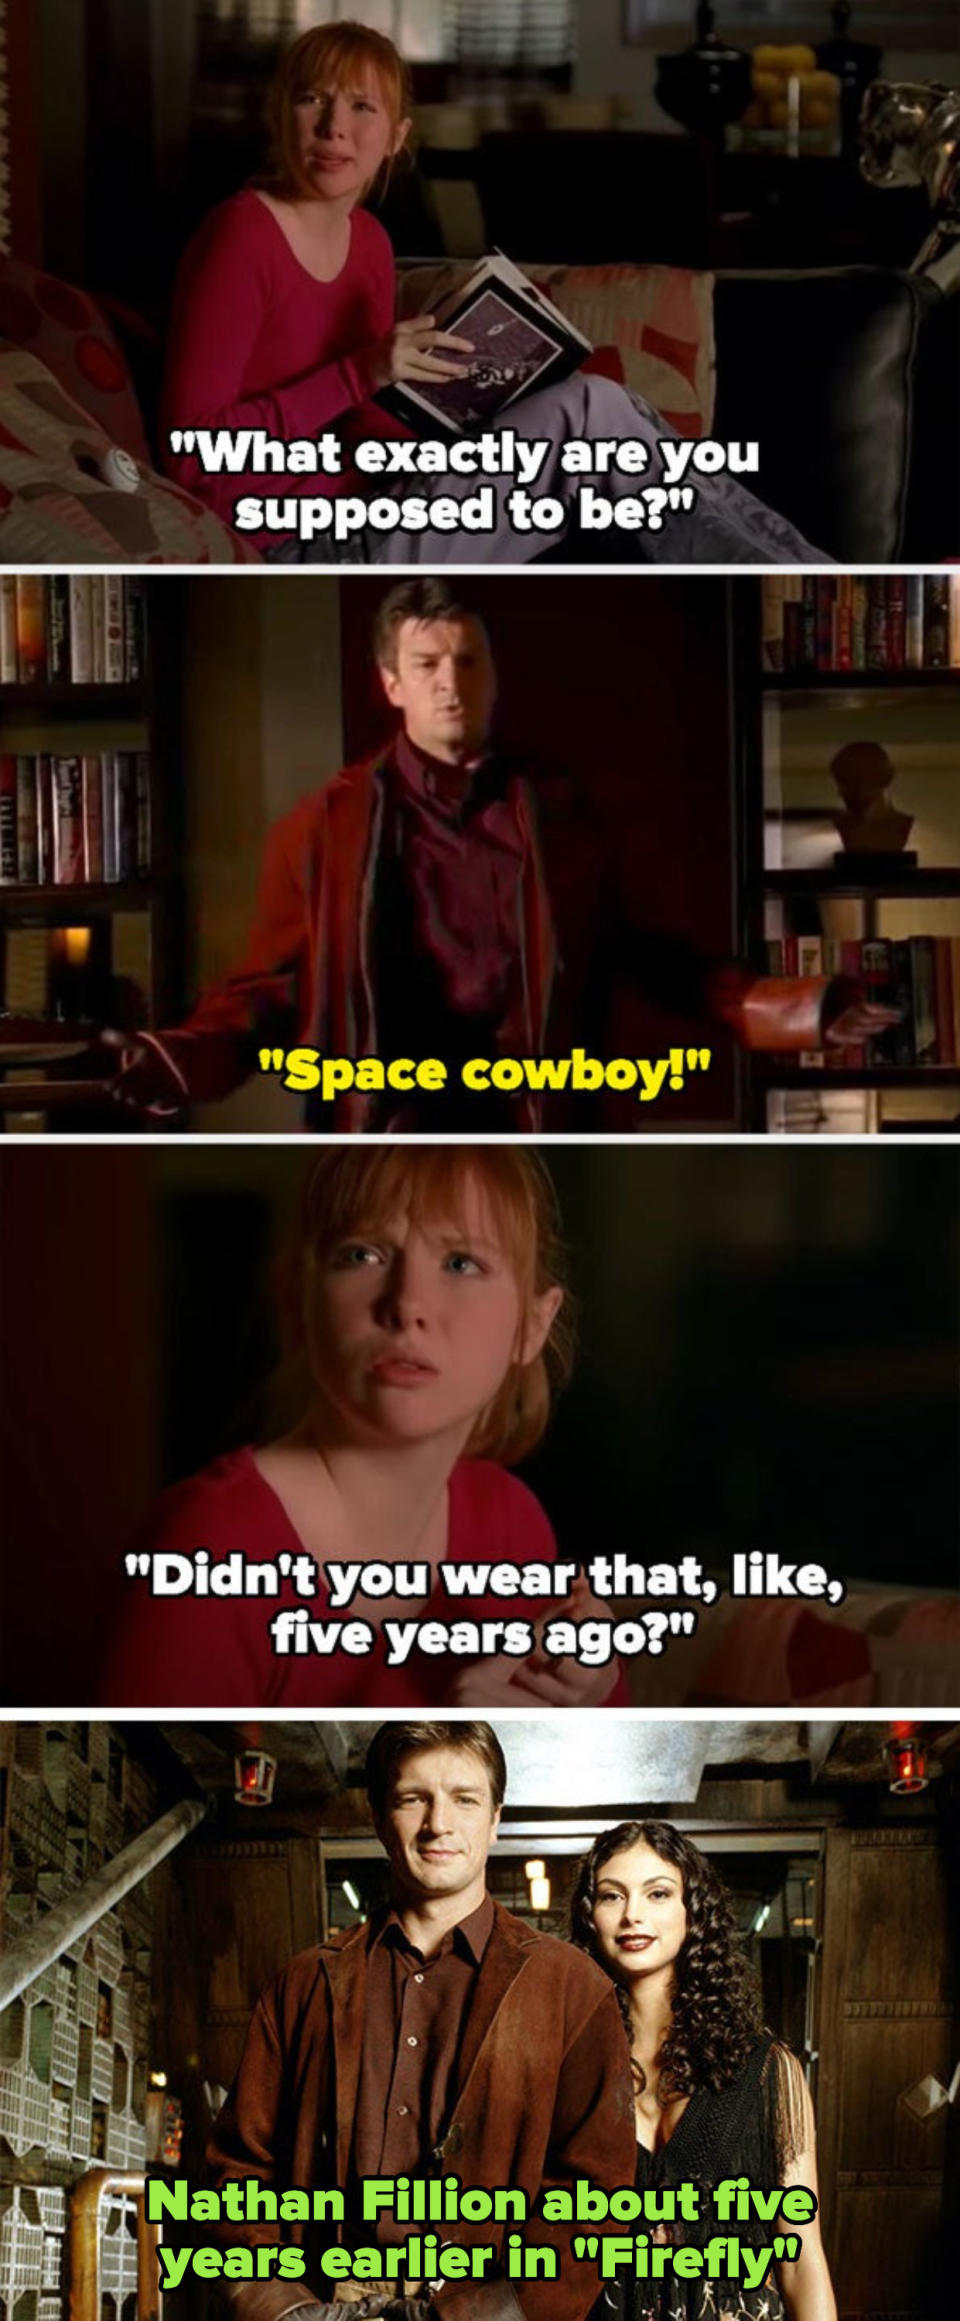 Castle's daughter asks him what he's supposed to be, and Castle says "space cowboy," donning his costume from "Firefly" — his daughter says he wore it 5 years ago